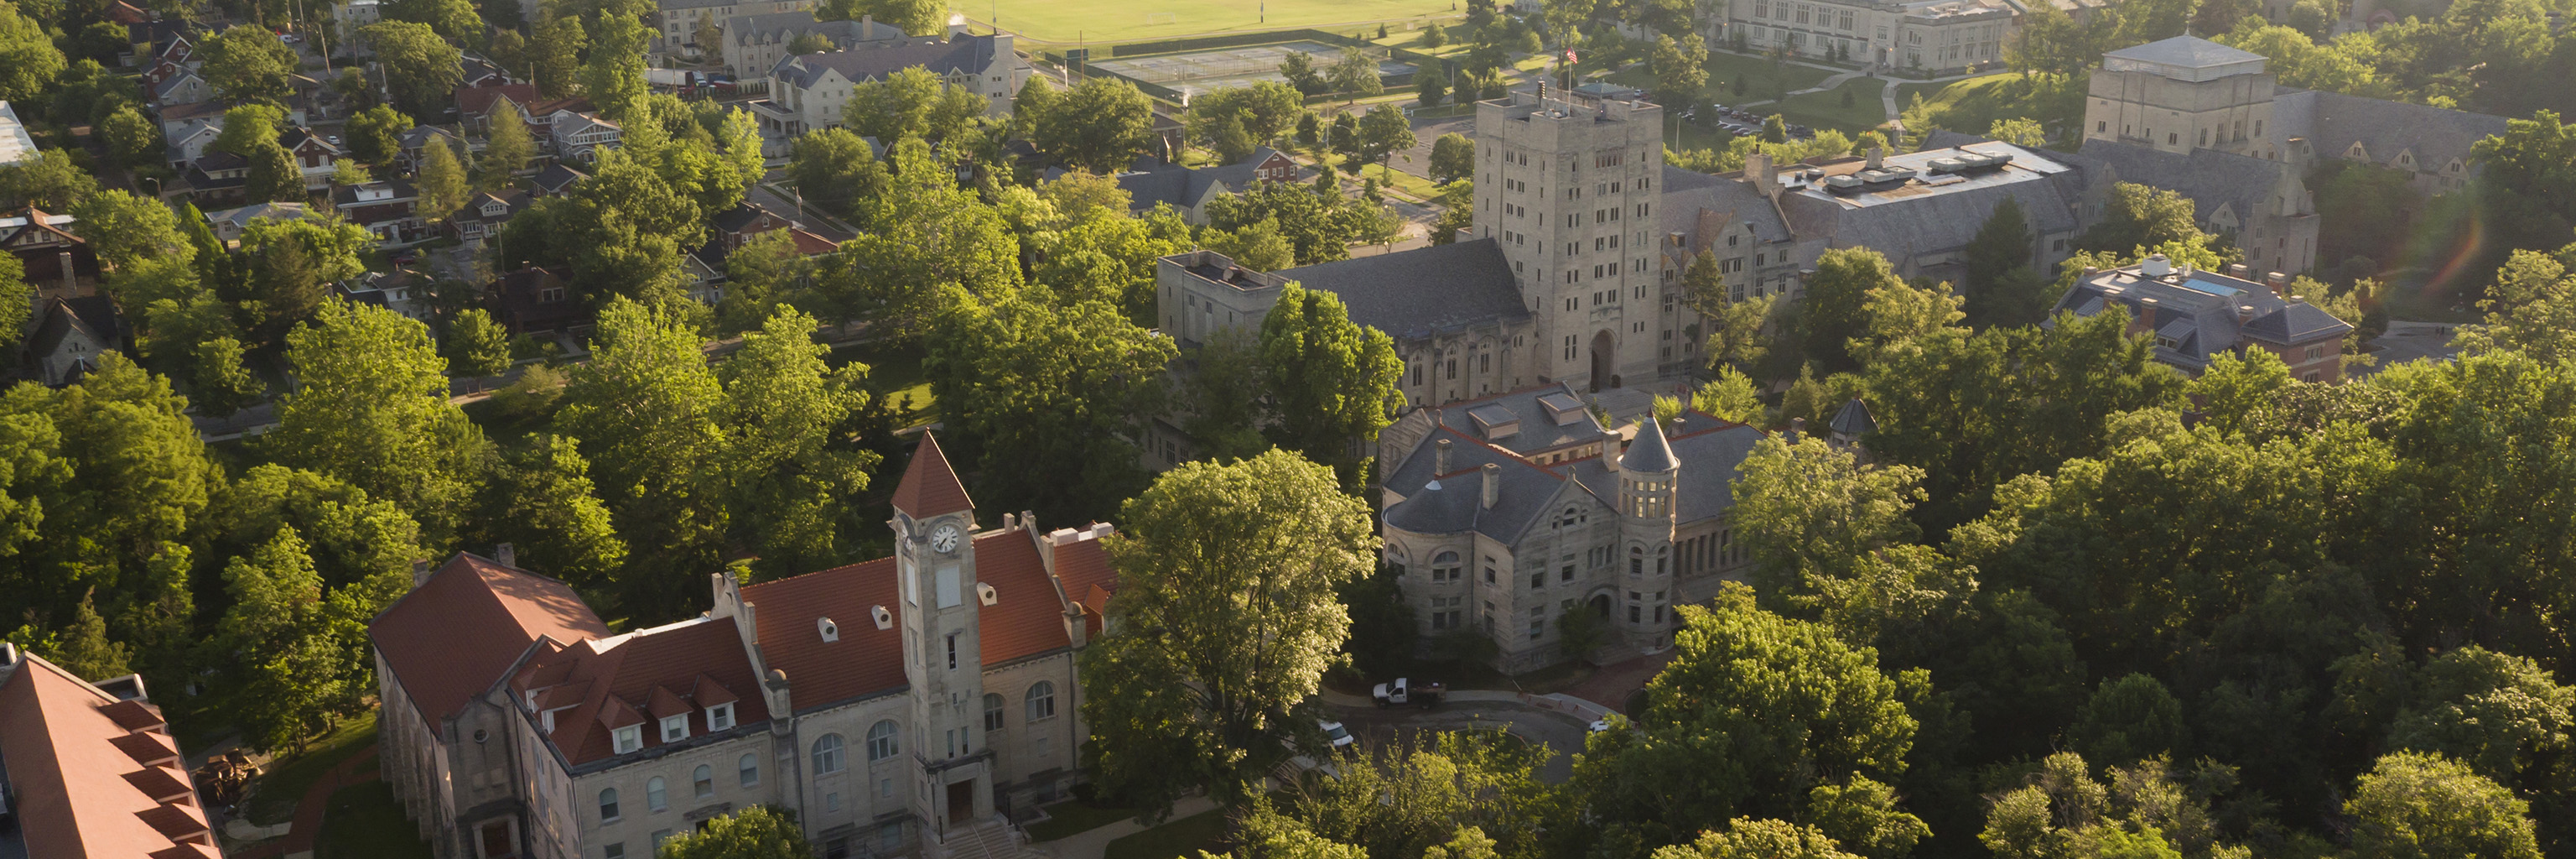 Aerial view of the Old Crescent portion of the Indiana University Bloomington campus